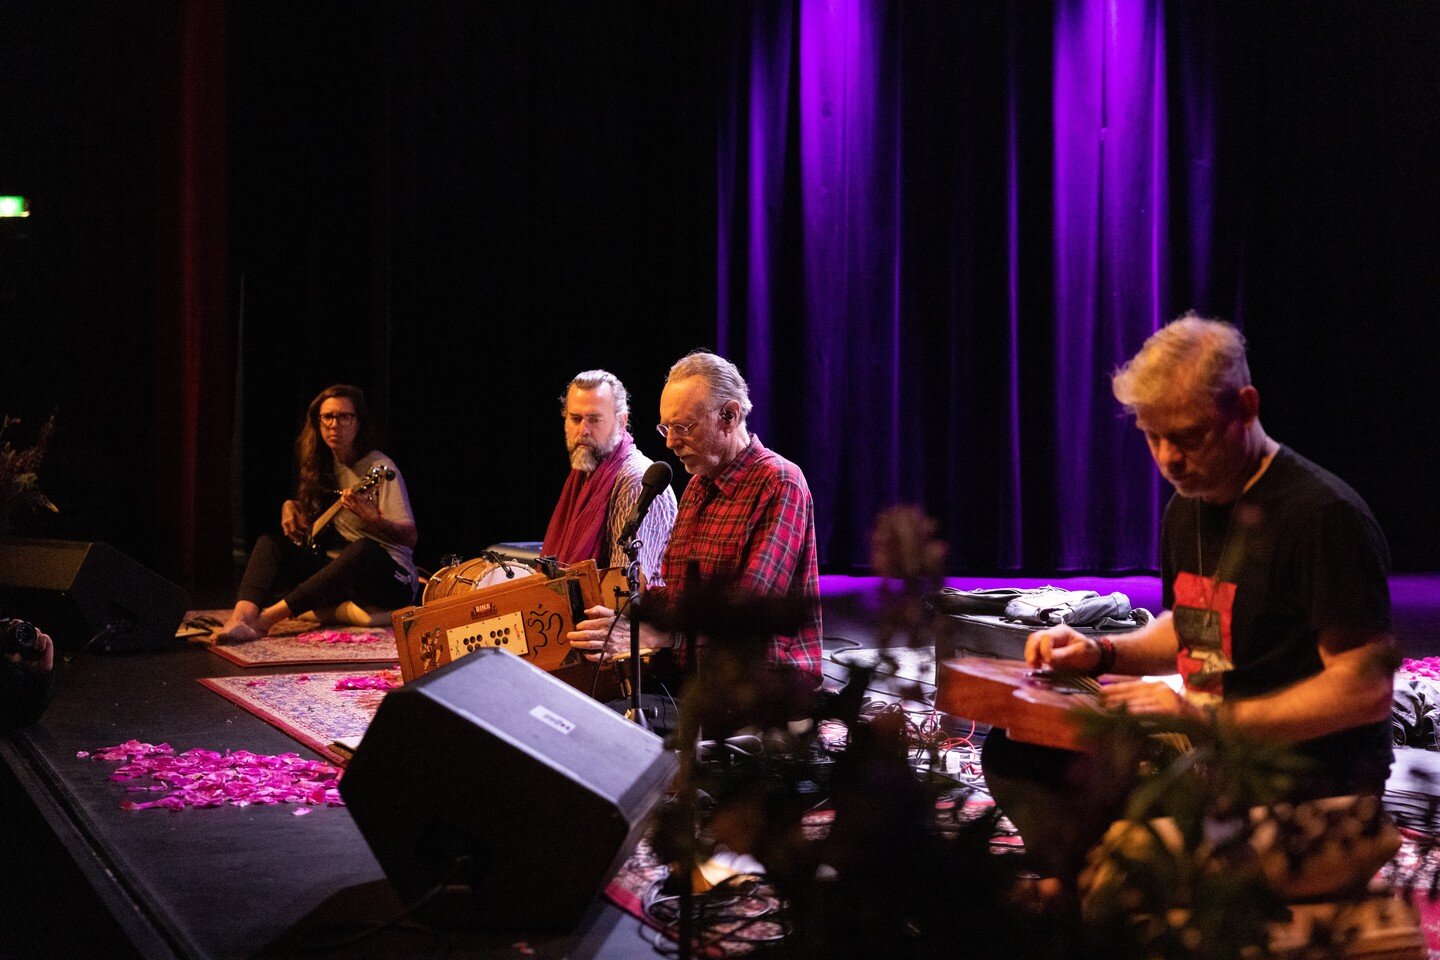 Thank you @krishnadasmusic for coming to Copenhagen and sharing the Love. We were all very grateful to hang out in The Heart Space together with you. RamRam ❤️🙏 

Photos by Josefine Barrett 

@gopianand_kirtan 
@nielslegethom 
@rastablanche 
@josefi